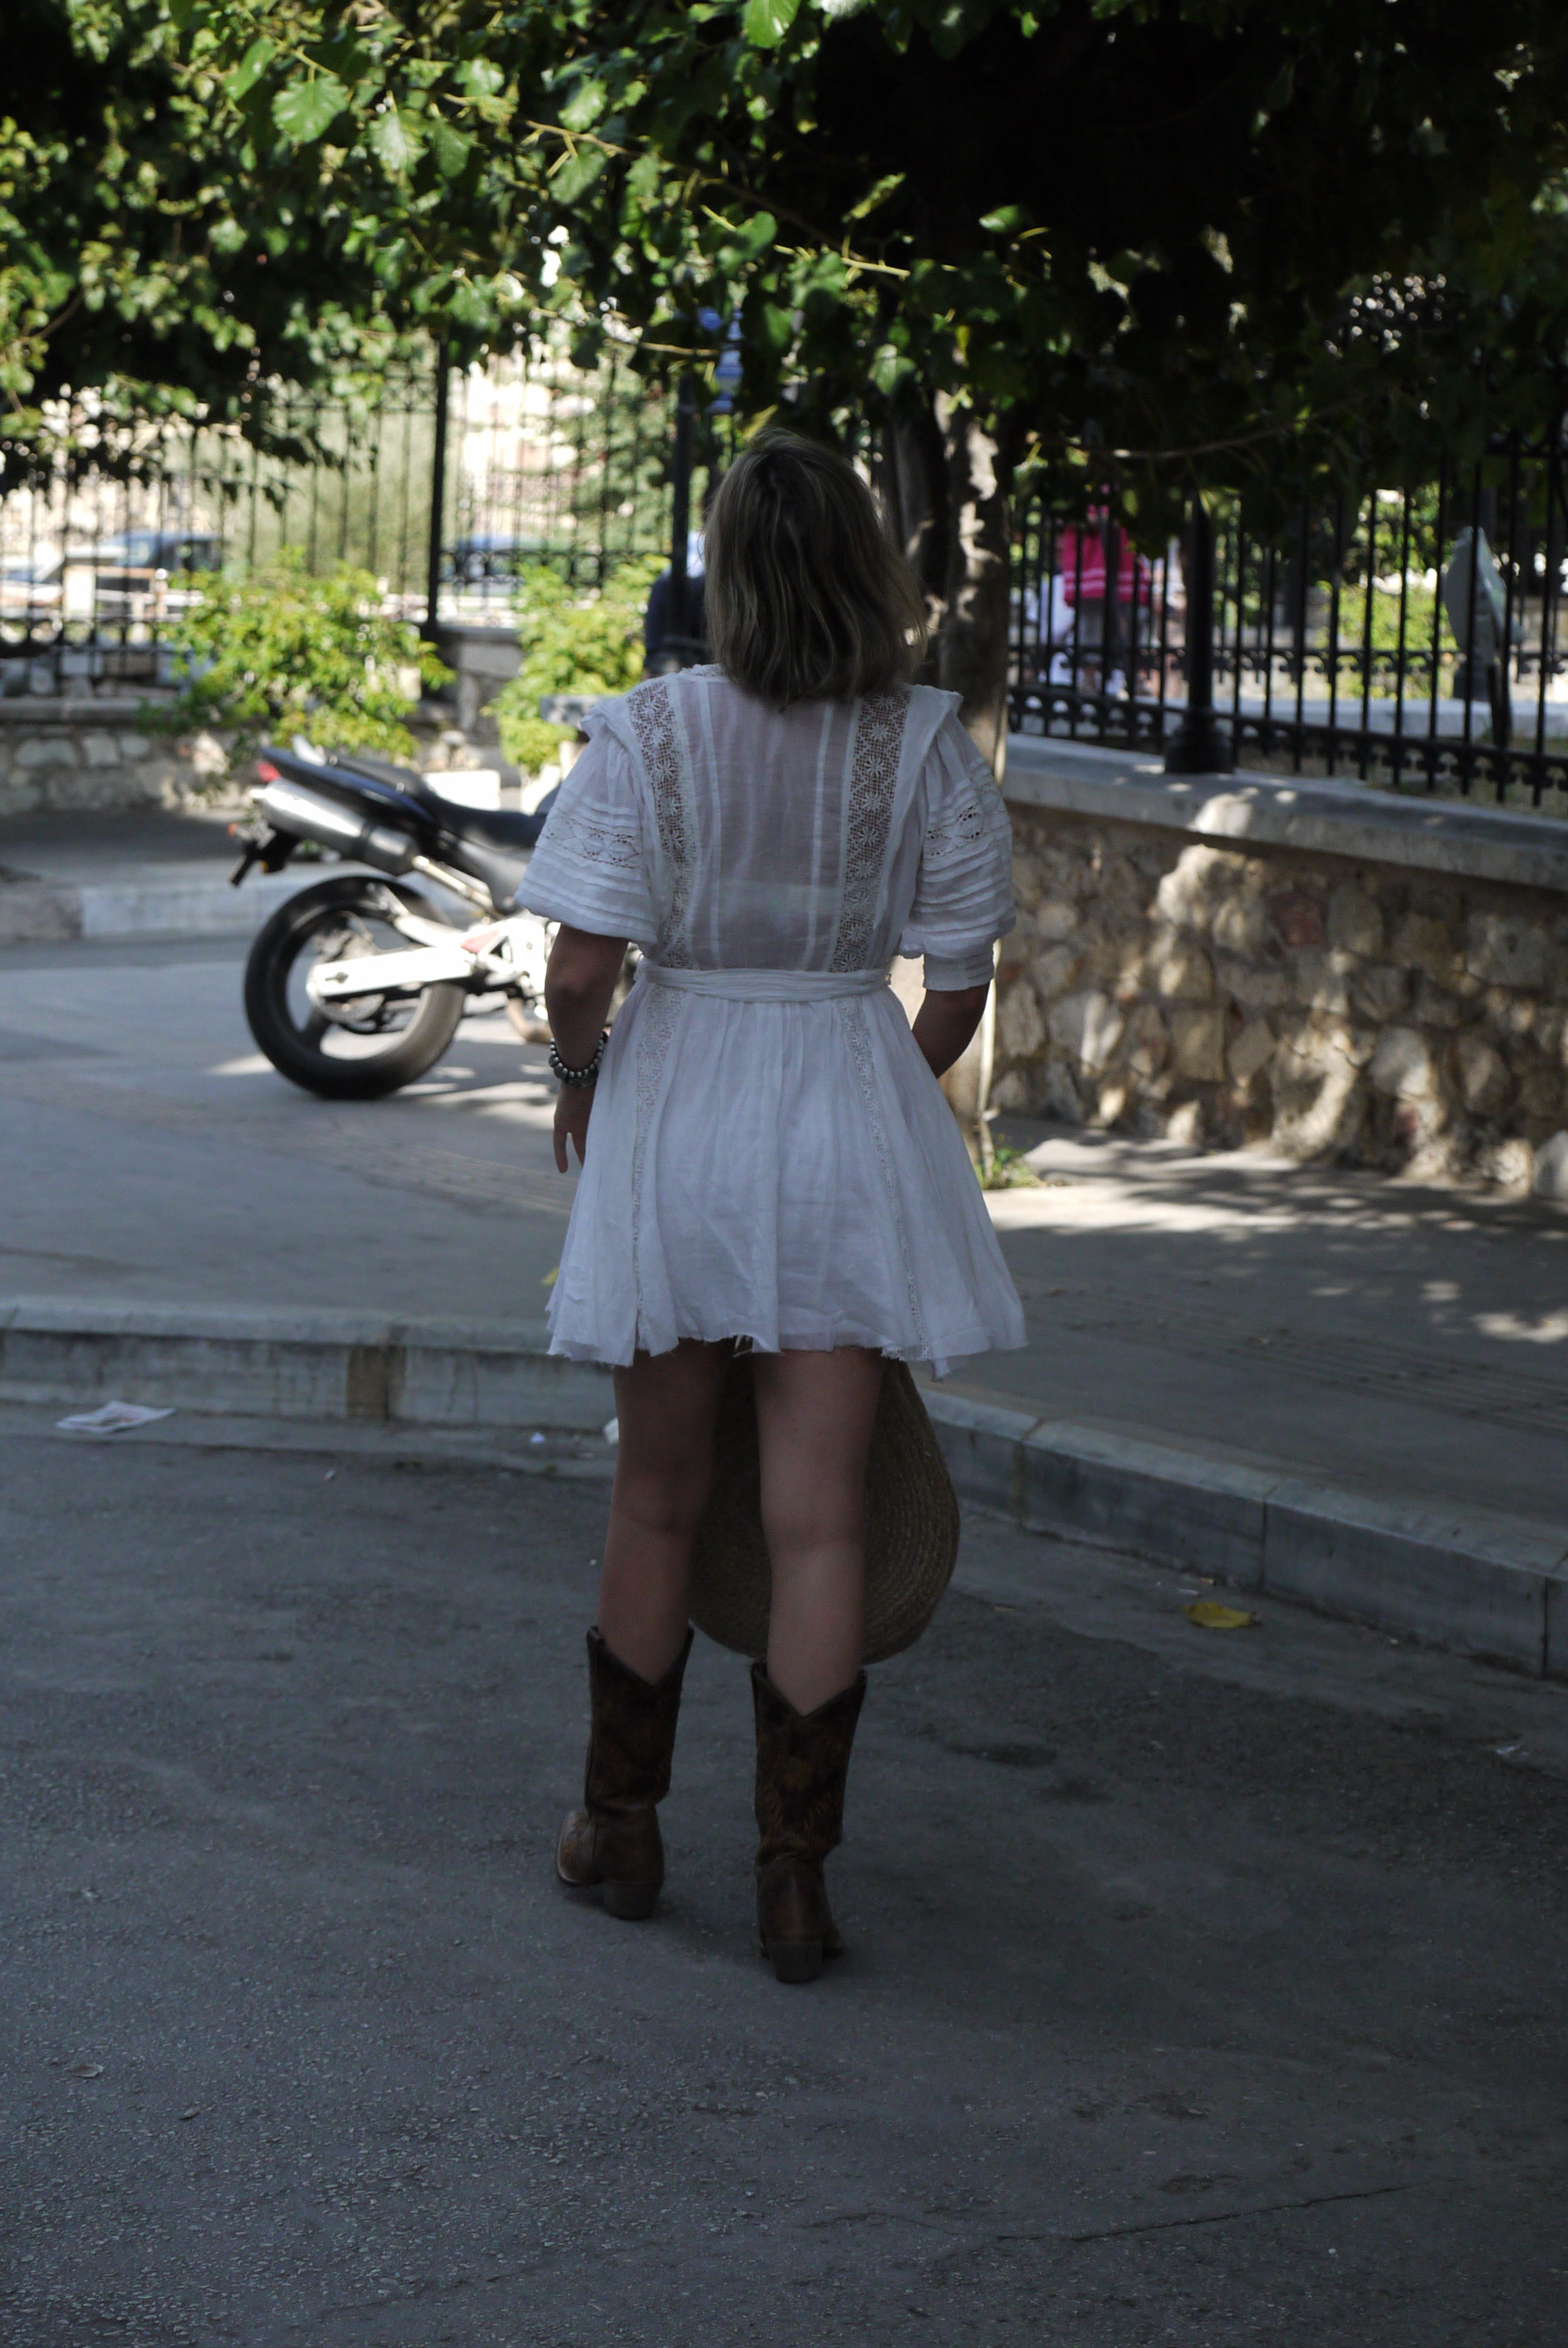 Alba Marina Otero fashion blogger from Mylovelypeople blog shares with you the diferents kind of activities to do in Miami during these days and how to dress for a Festival with a white mini dress paired with cowboy boots and a braided bag.